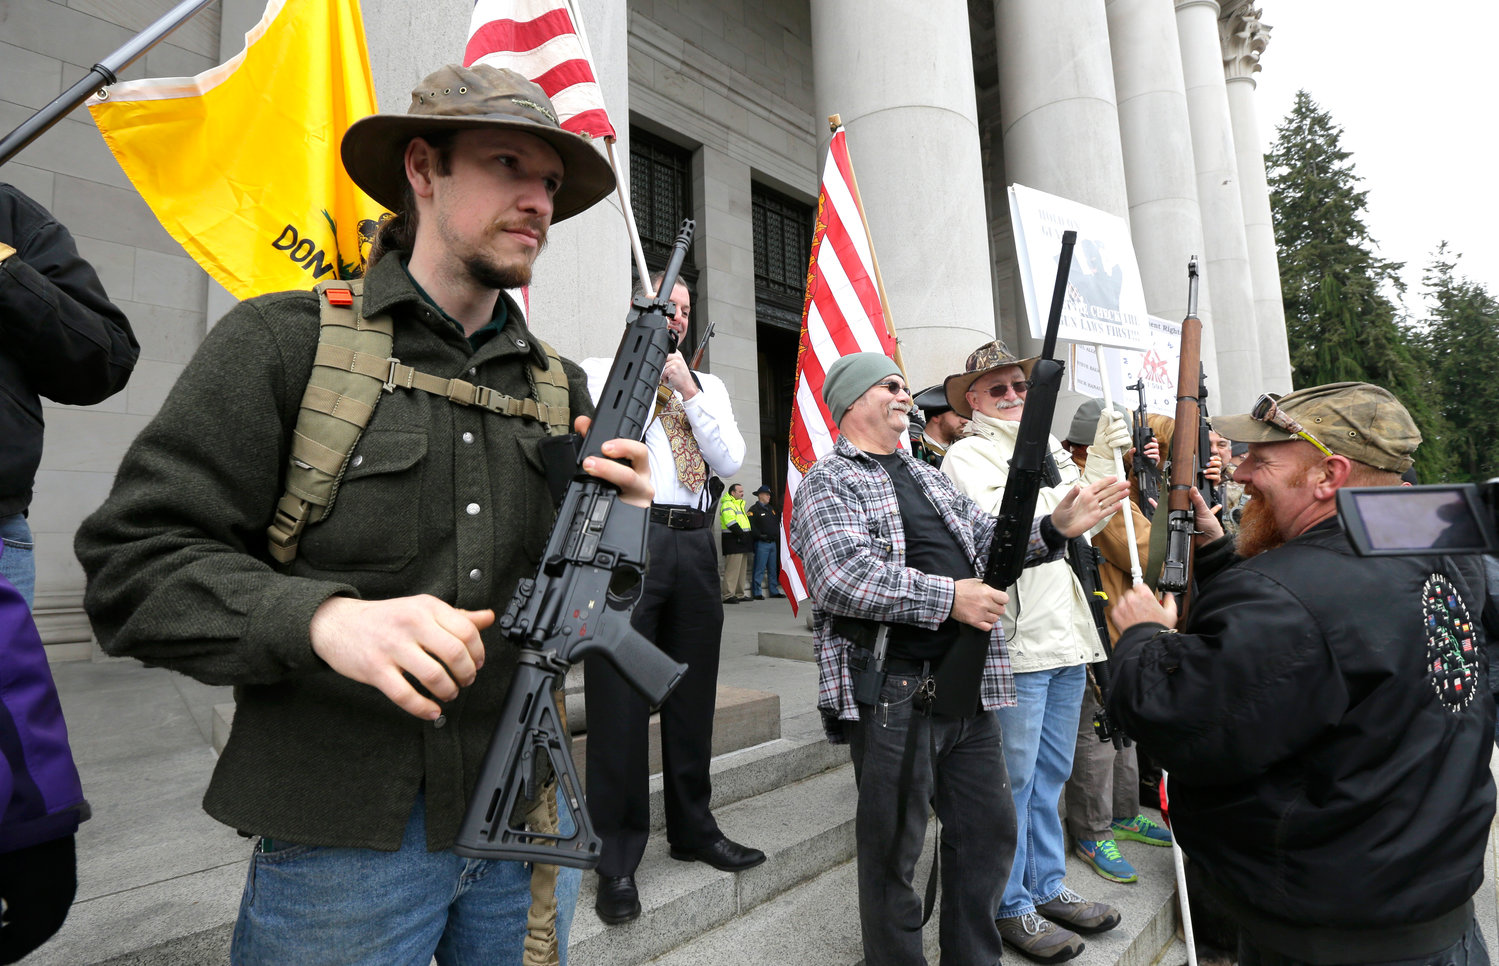 Gun owners display their weapons on the steps of the Legislative Building during a gun-rights rally, Thursday, Jan. 15, 2015, at the Capitol in Olympia, Wash. The protestors were demonstrating against the state's Initiative 594, which requires - with only a few exceptions - background checks on all gun sales and transfers. (AP Photo/Ted S. Warren)